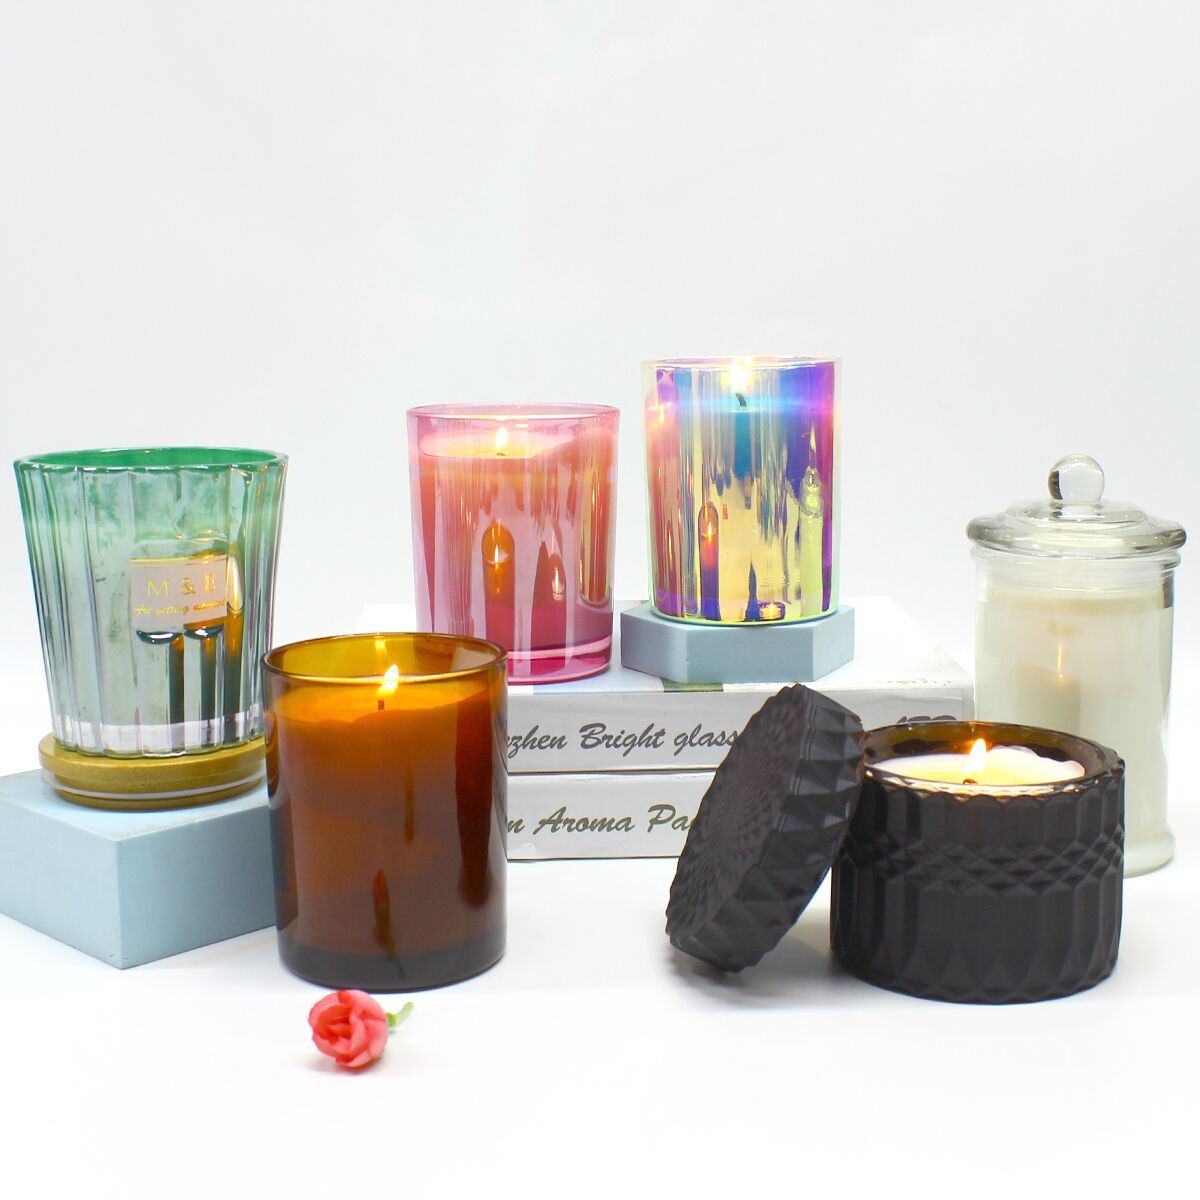 Cambridge Holgram glass candle jar|Relax and feel happy 